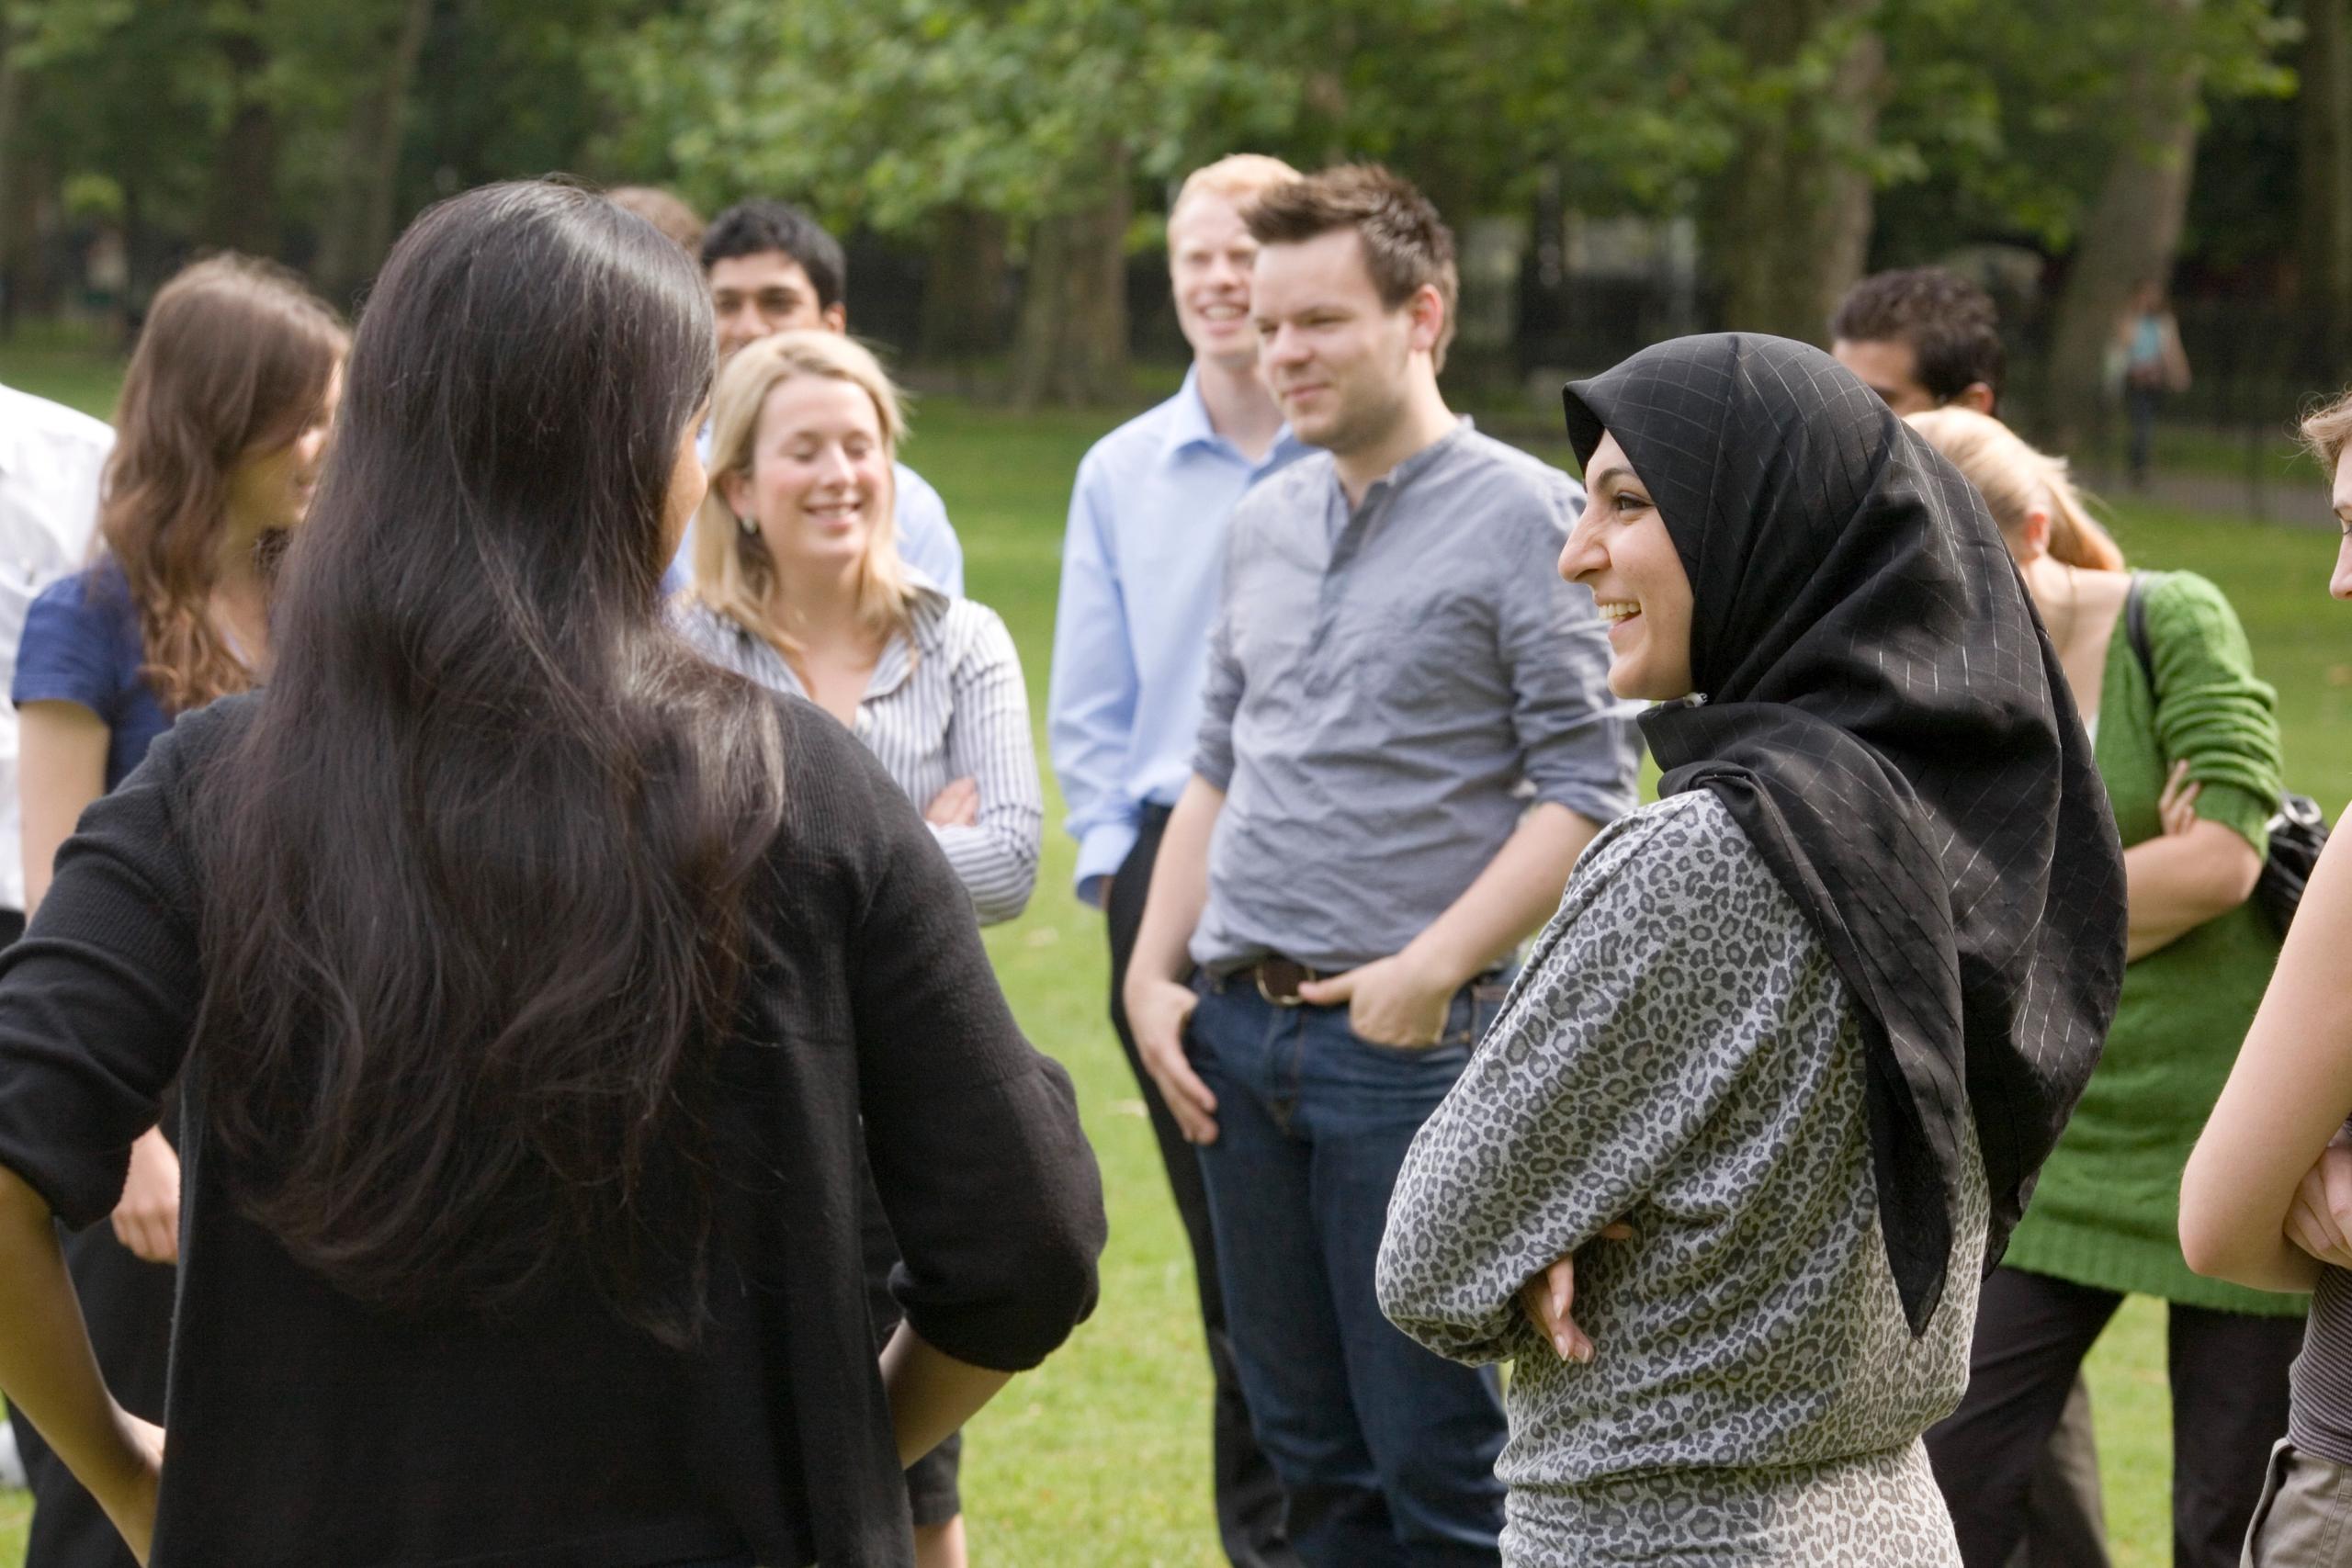 A group of young people in conversation outdoors